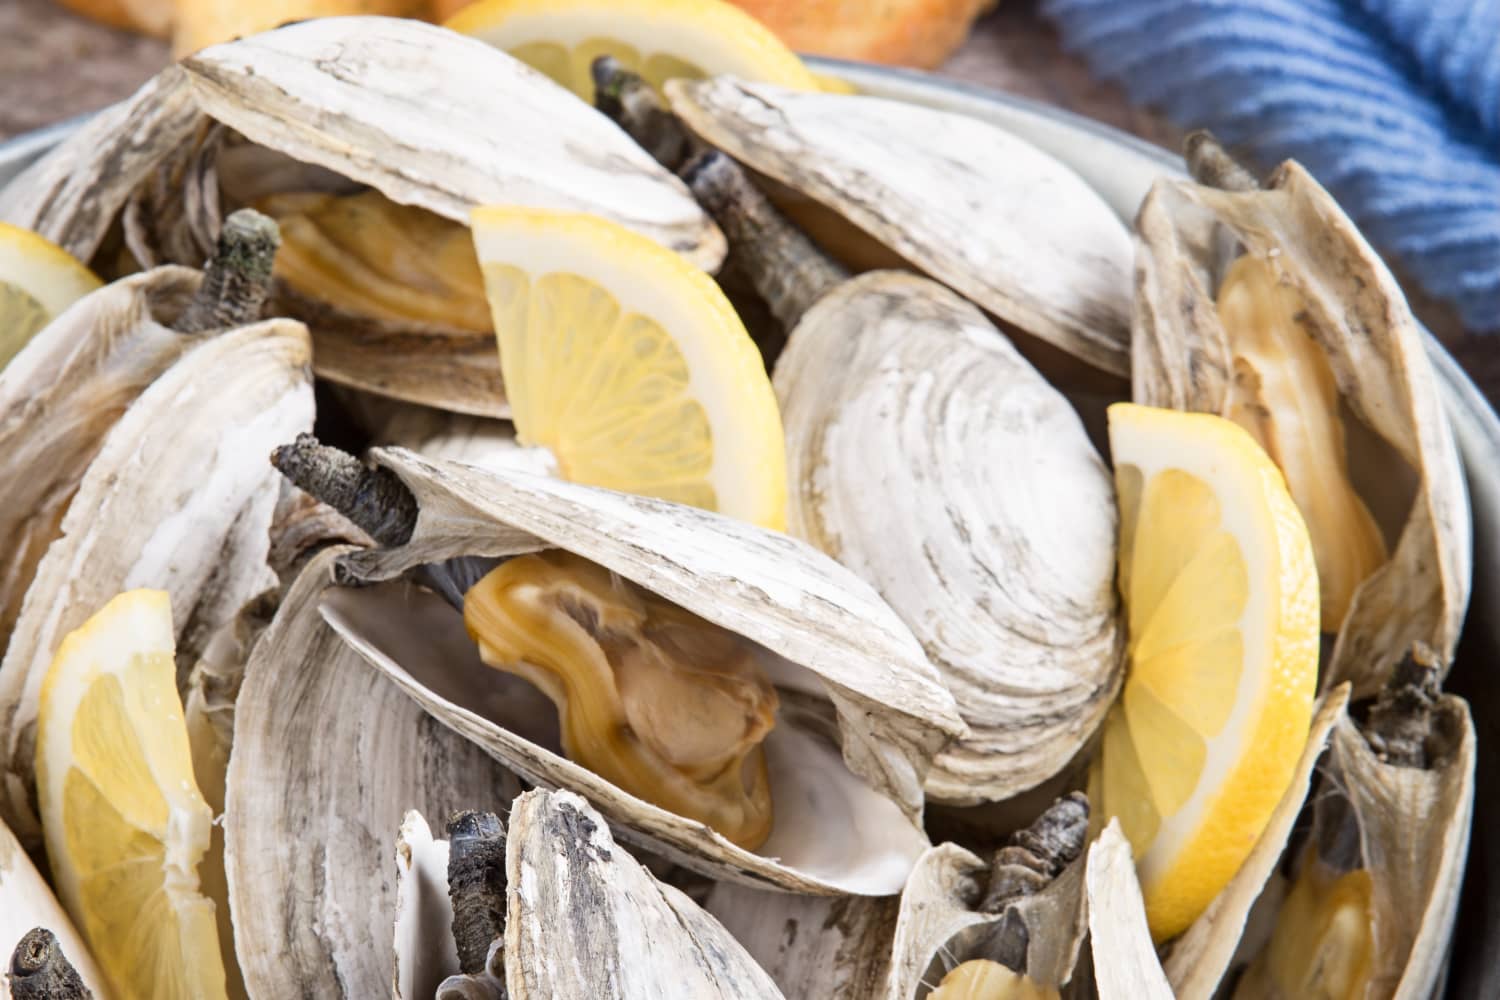 5 Smart Ways to Use Up a Bottle of Opened Clam Juice